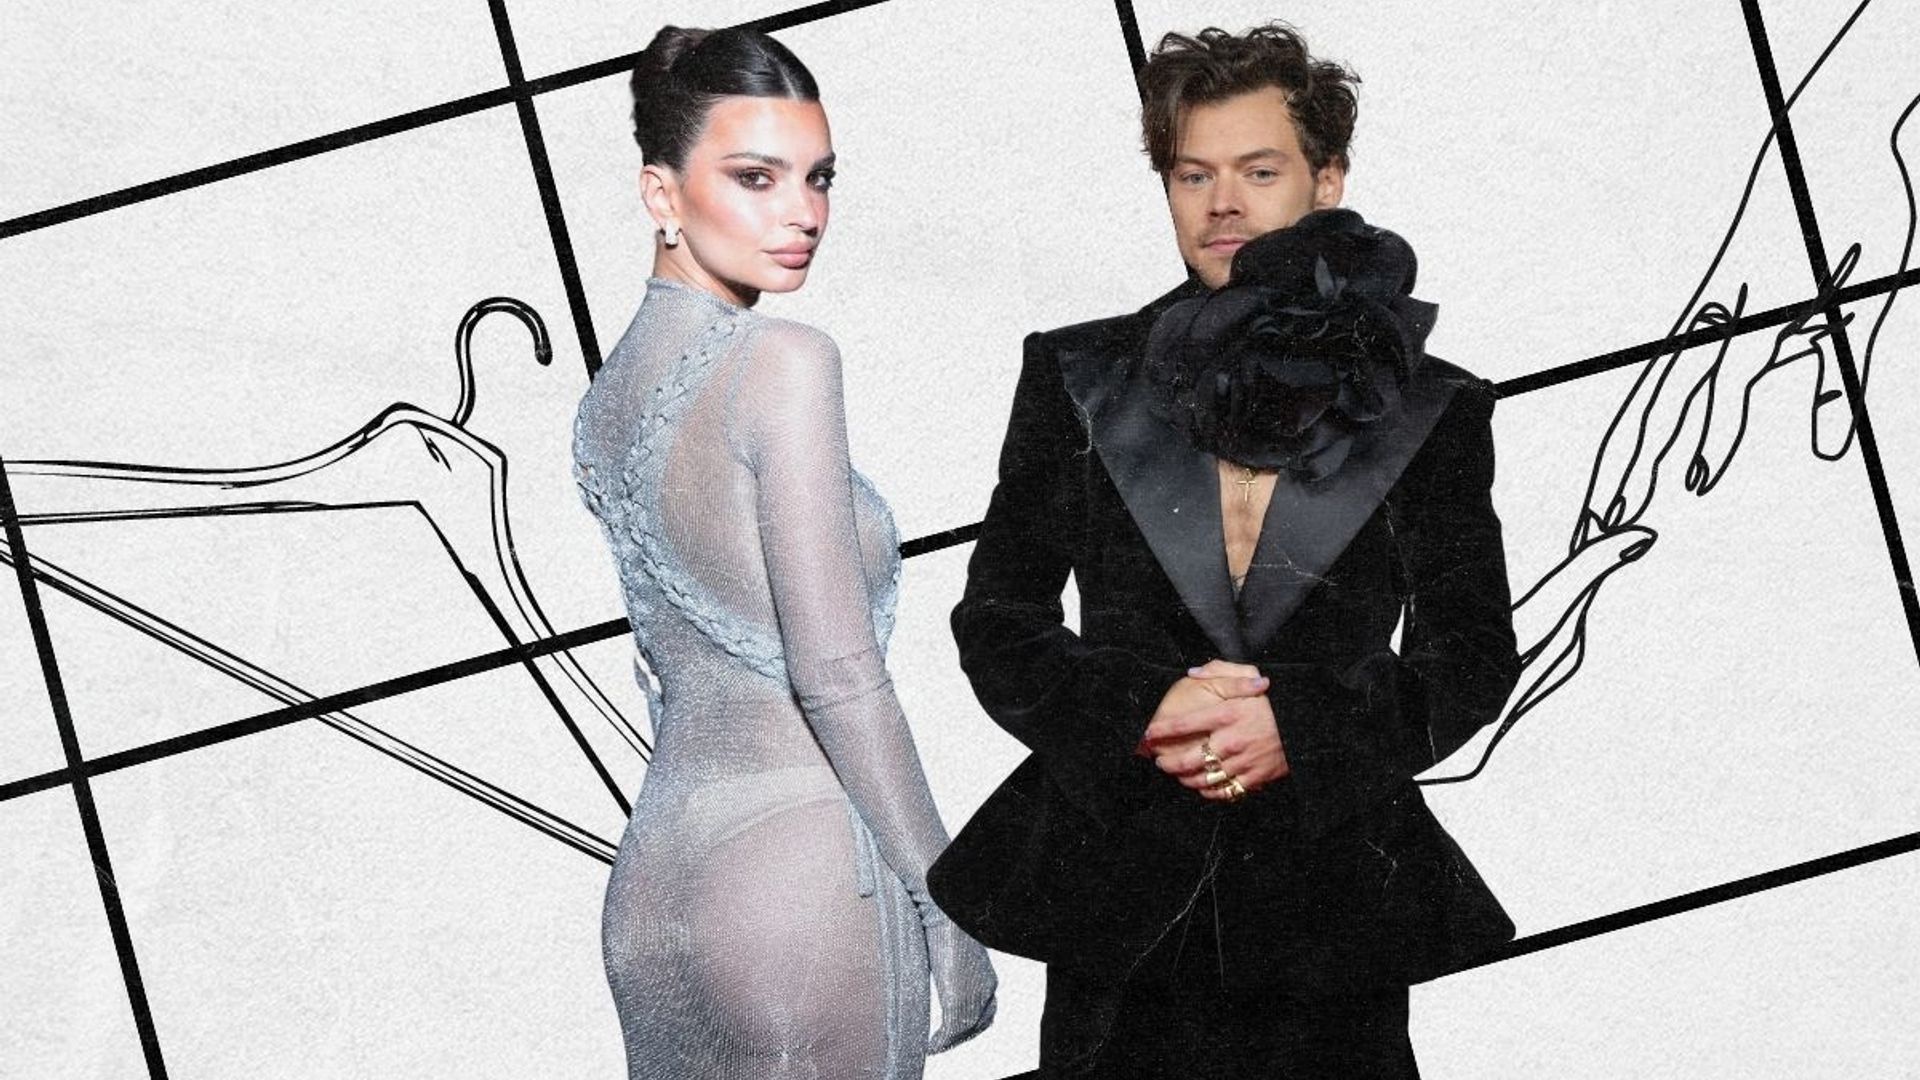 Harry Styles & Emily Ratajkowski: Could this be fashion's hottest new power couple?